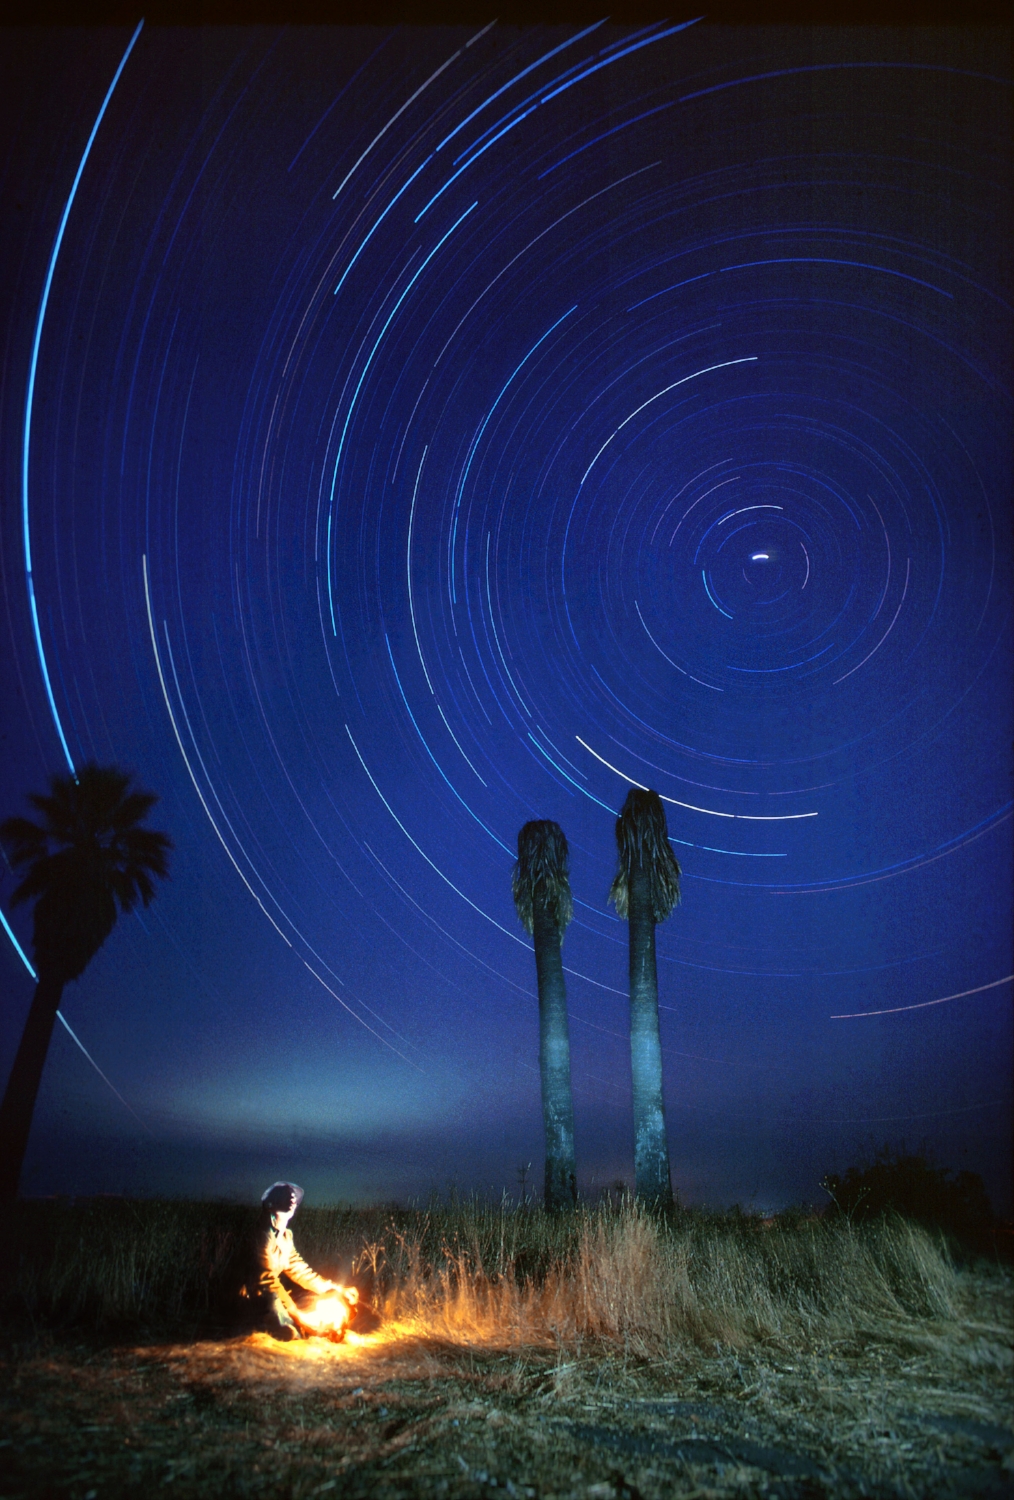  Due the Earth's rotation during a four hour exposure, the stars appear to spin around Polaris (the north star) in Lincoln, CA. 